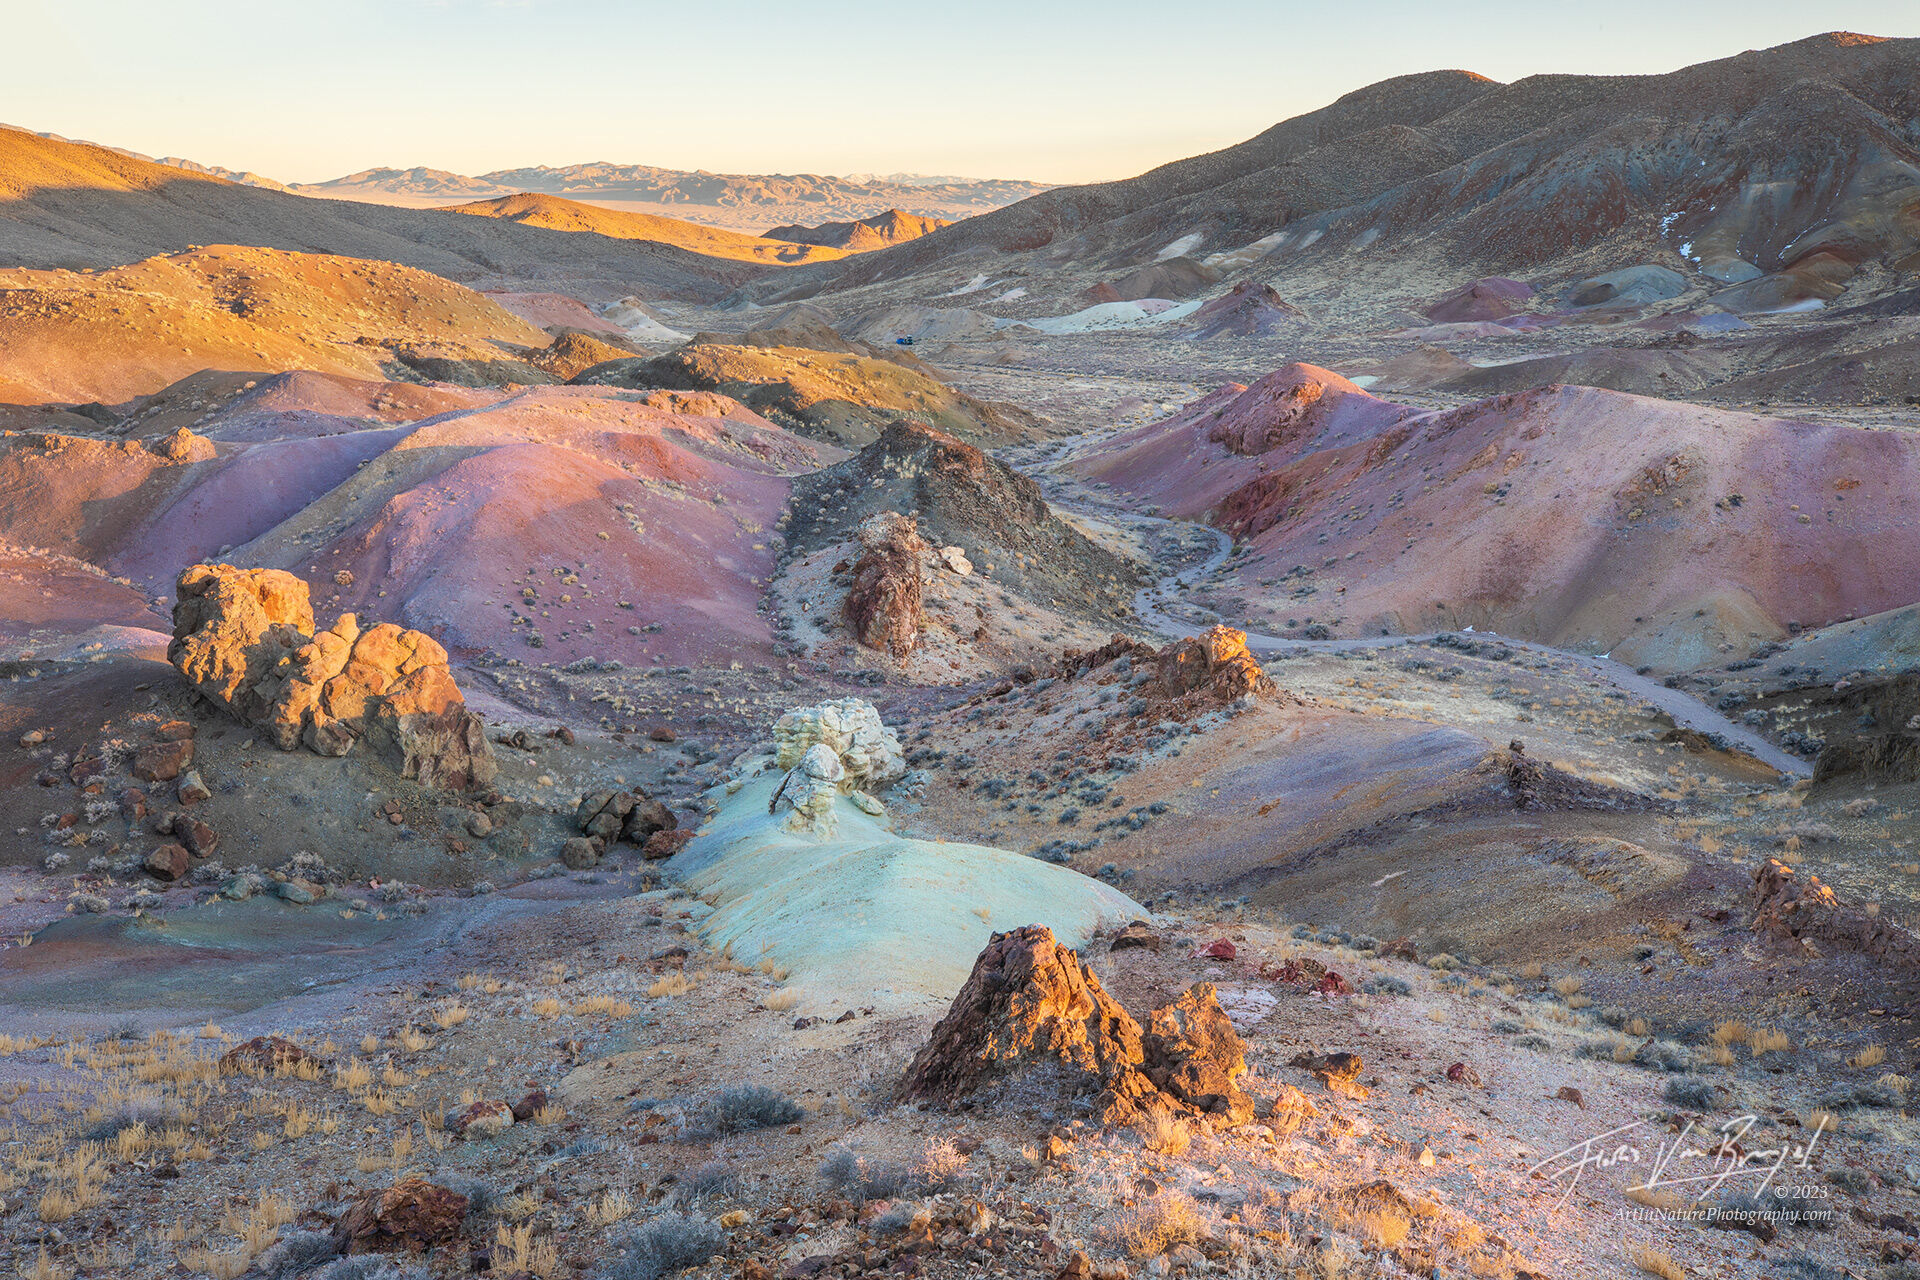 Last light on a landscape of colorfully painted hills in Nevada's Monte Cristo mountains.